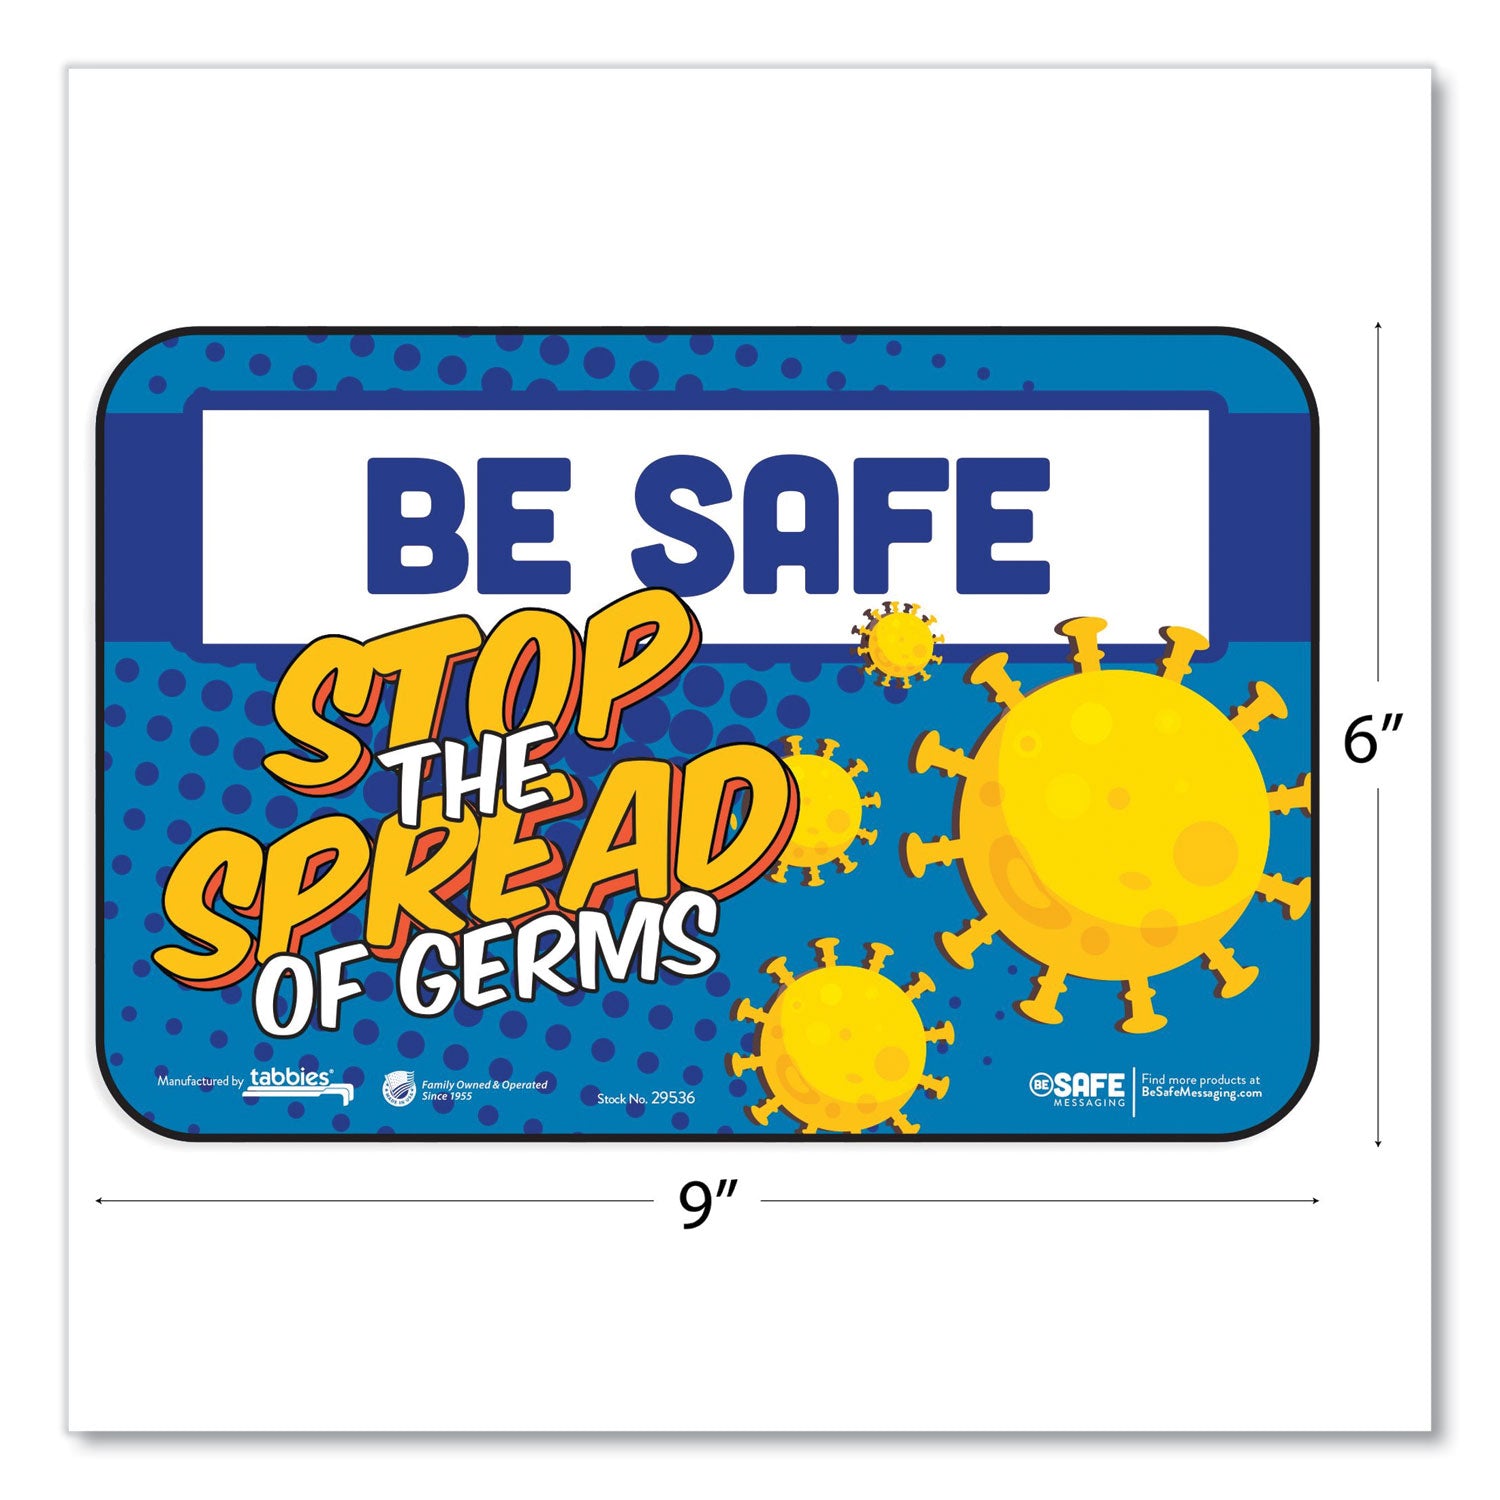 besafe-messaging-education-wall-signs-9-x-6-be-safe-stop-the-spread-of-germs-3-pack_tab29536 - 2